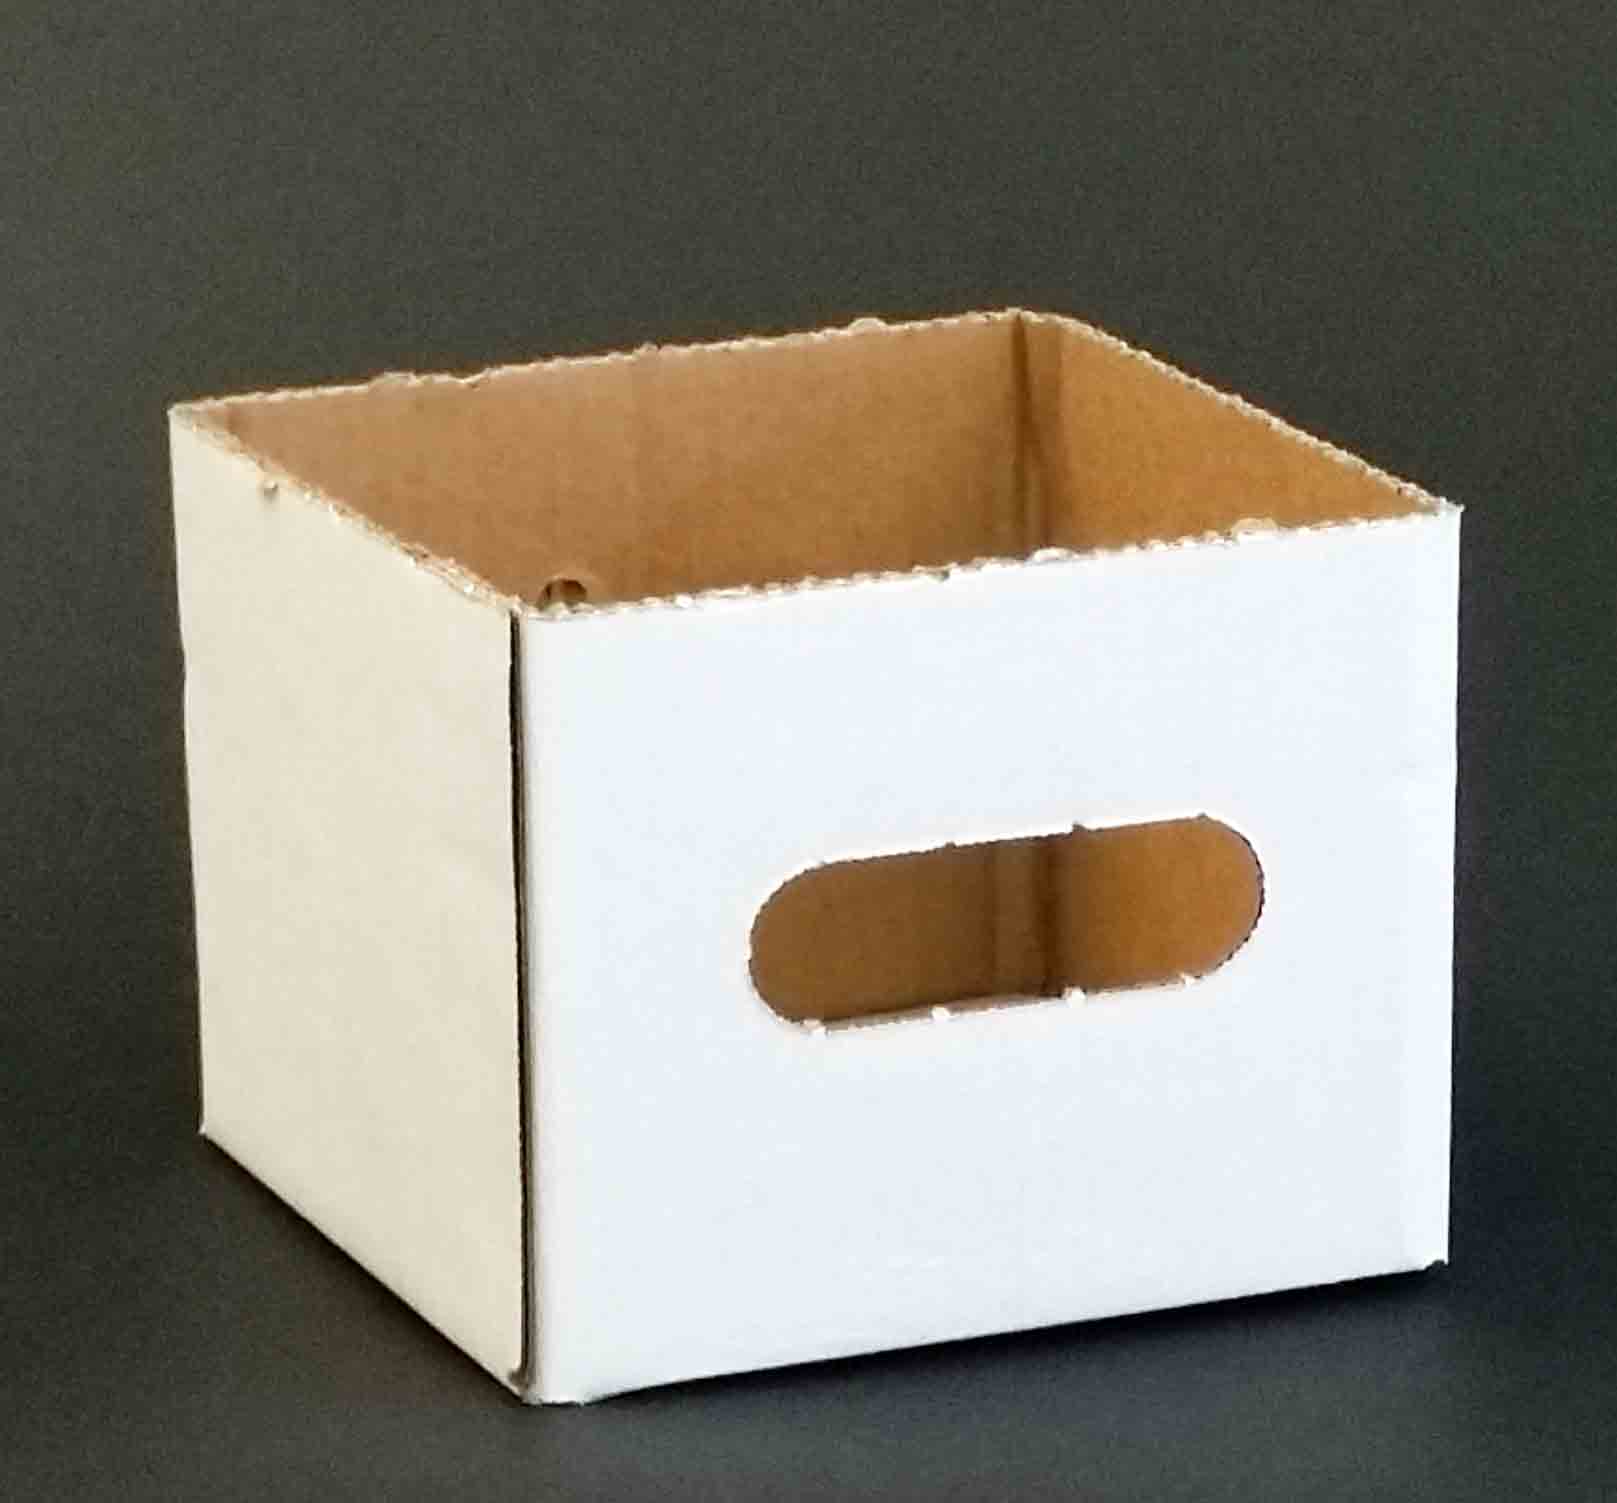 765 - 6 x 6 x 5" Delivery Box - 22.70 bdle of 50